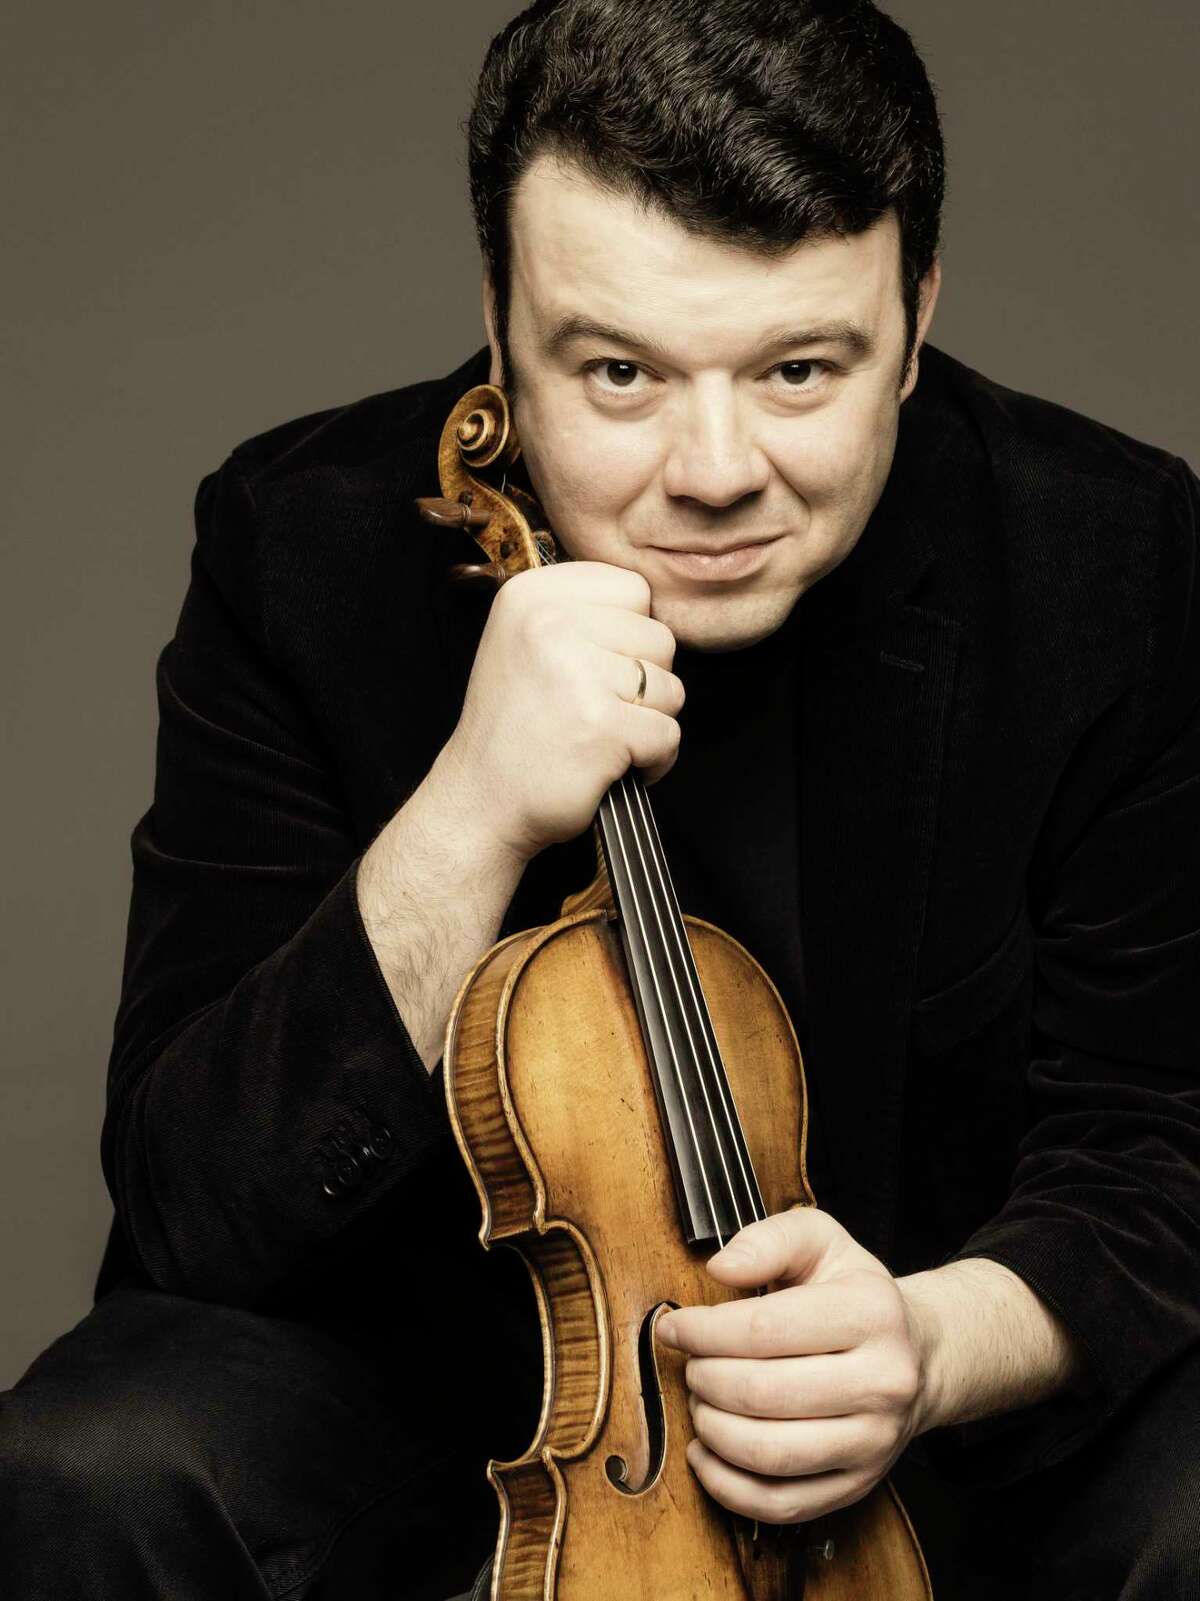 Violinist Vadim Gluzman is one of dozens of classical music artists enlisted by conductor Sebastian Lang-Lessing for VirtuMasterClass.